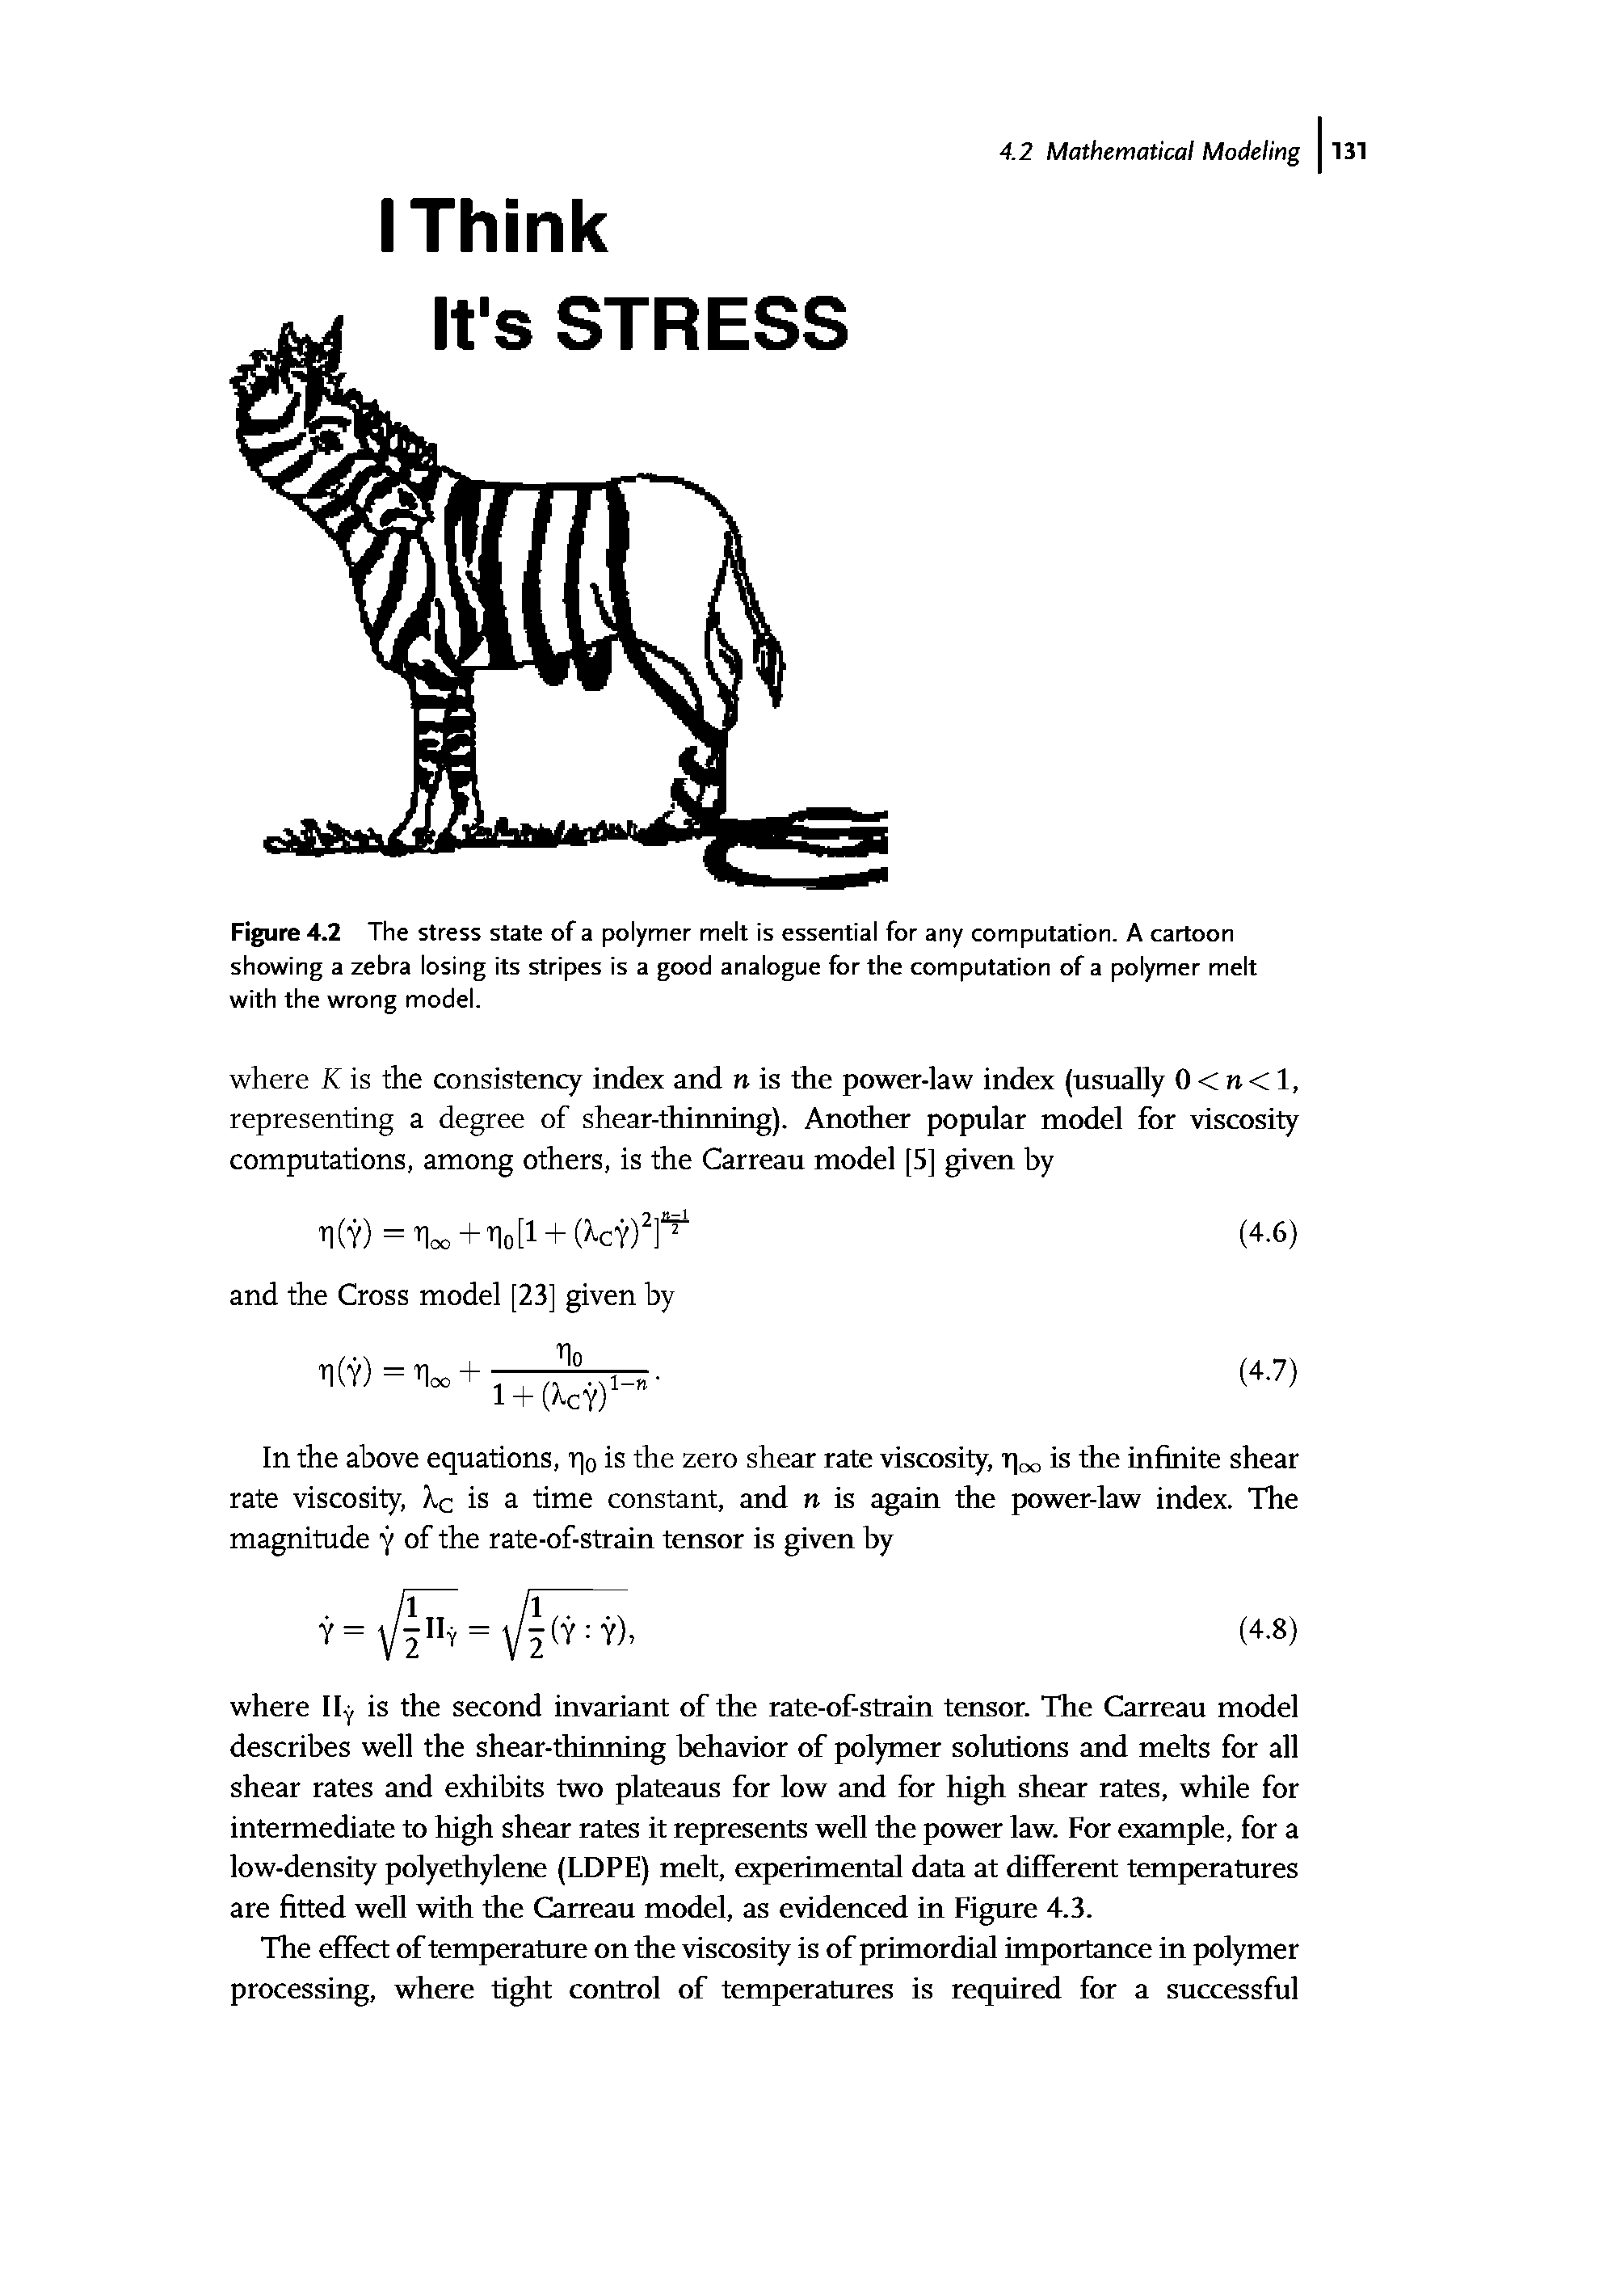 Figure 4.2 The stress state of a polymer melt is essential for any computation. A cartoon showing a zebra losing its stripes is a good analogue for the computation of a polymer melt with the wrong model.